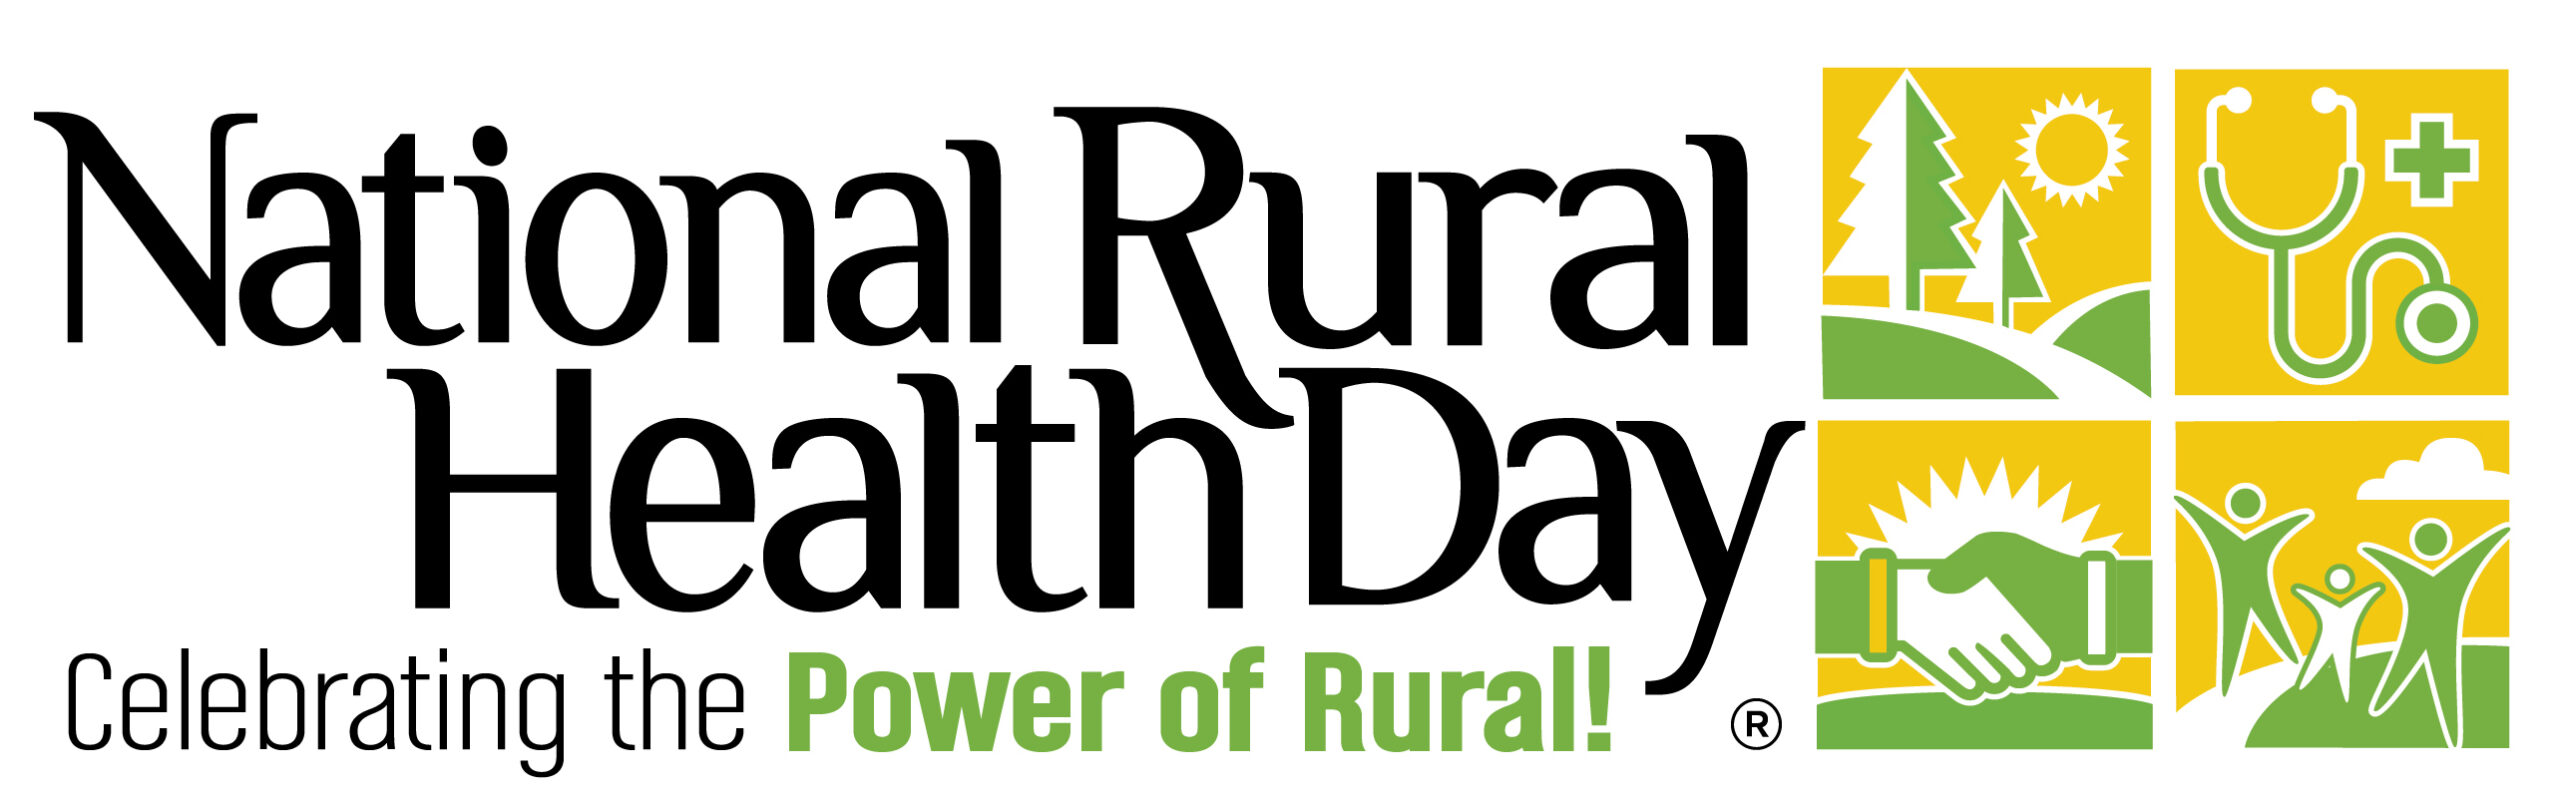 National Rural Health Day - Wyoming Department of Health